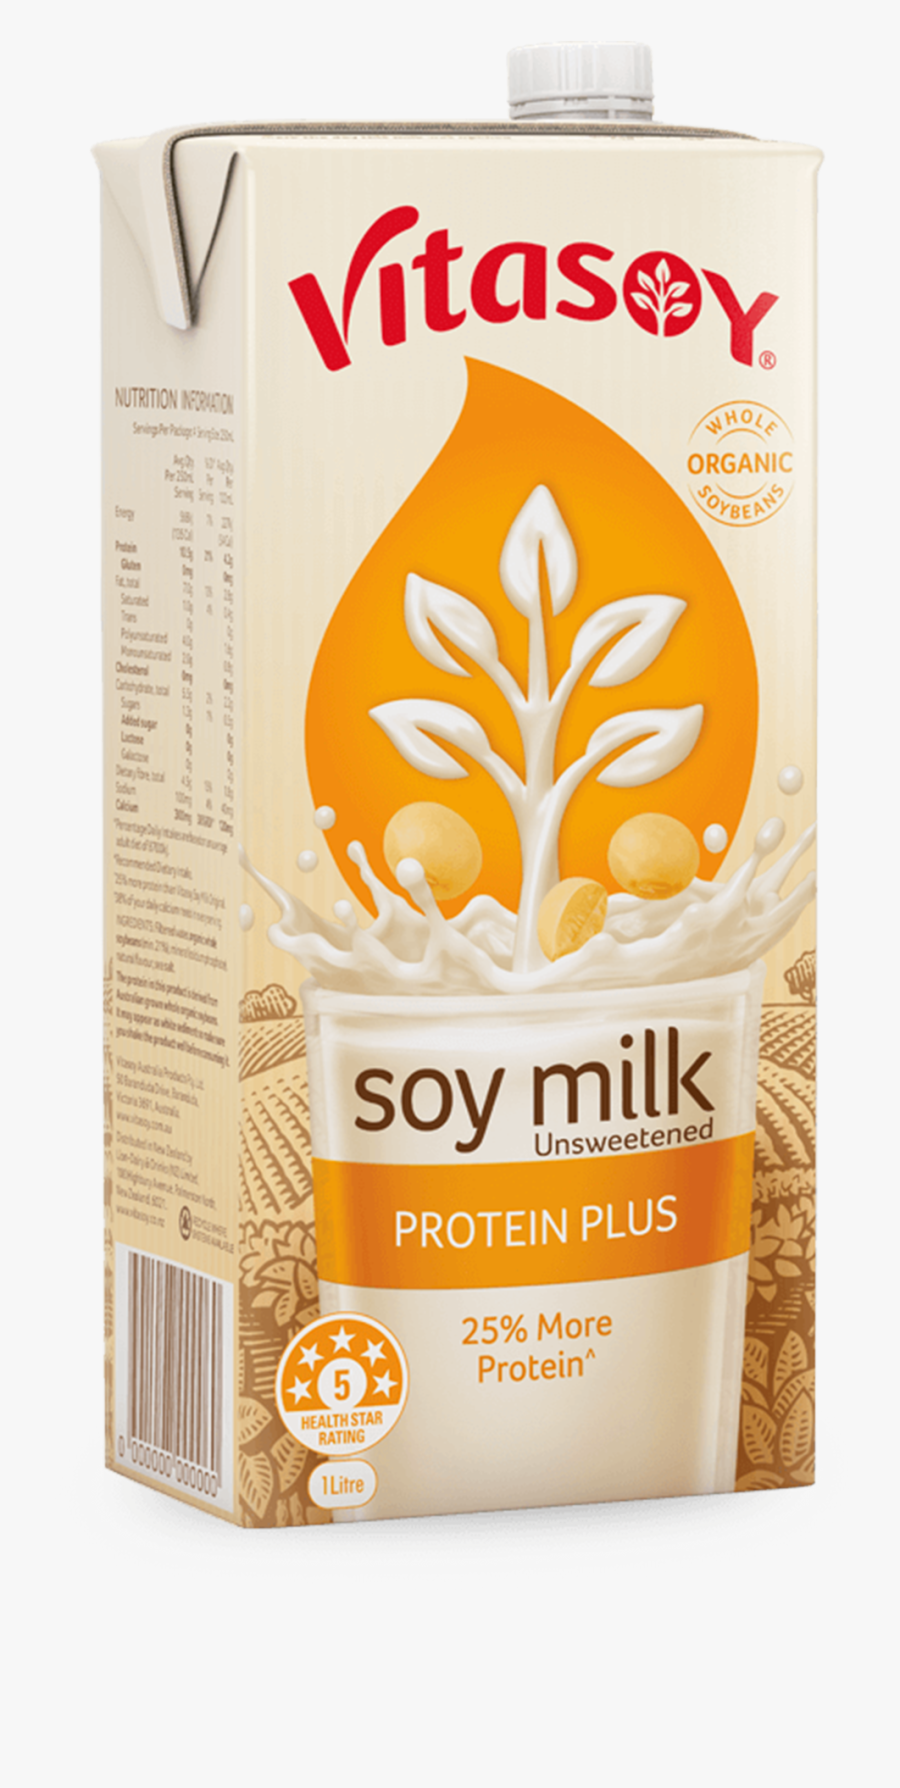 Image Of A 1l Carton Of Soy Milk - Vitasoy Soy Milk Calories, Transparent Clipart